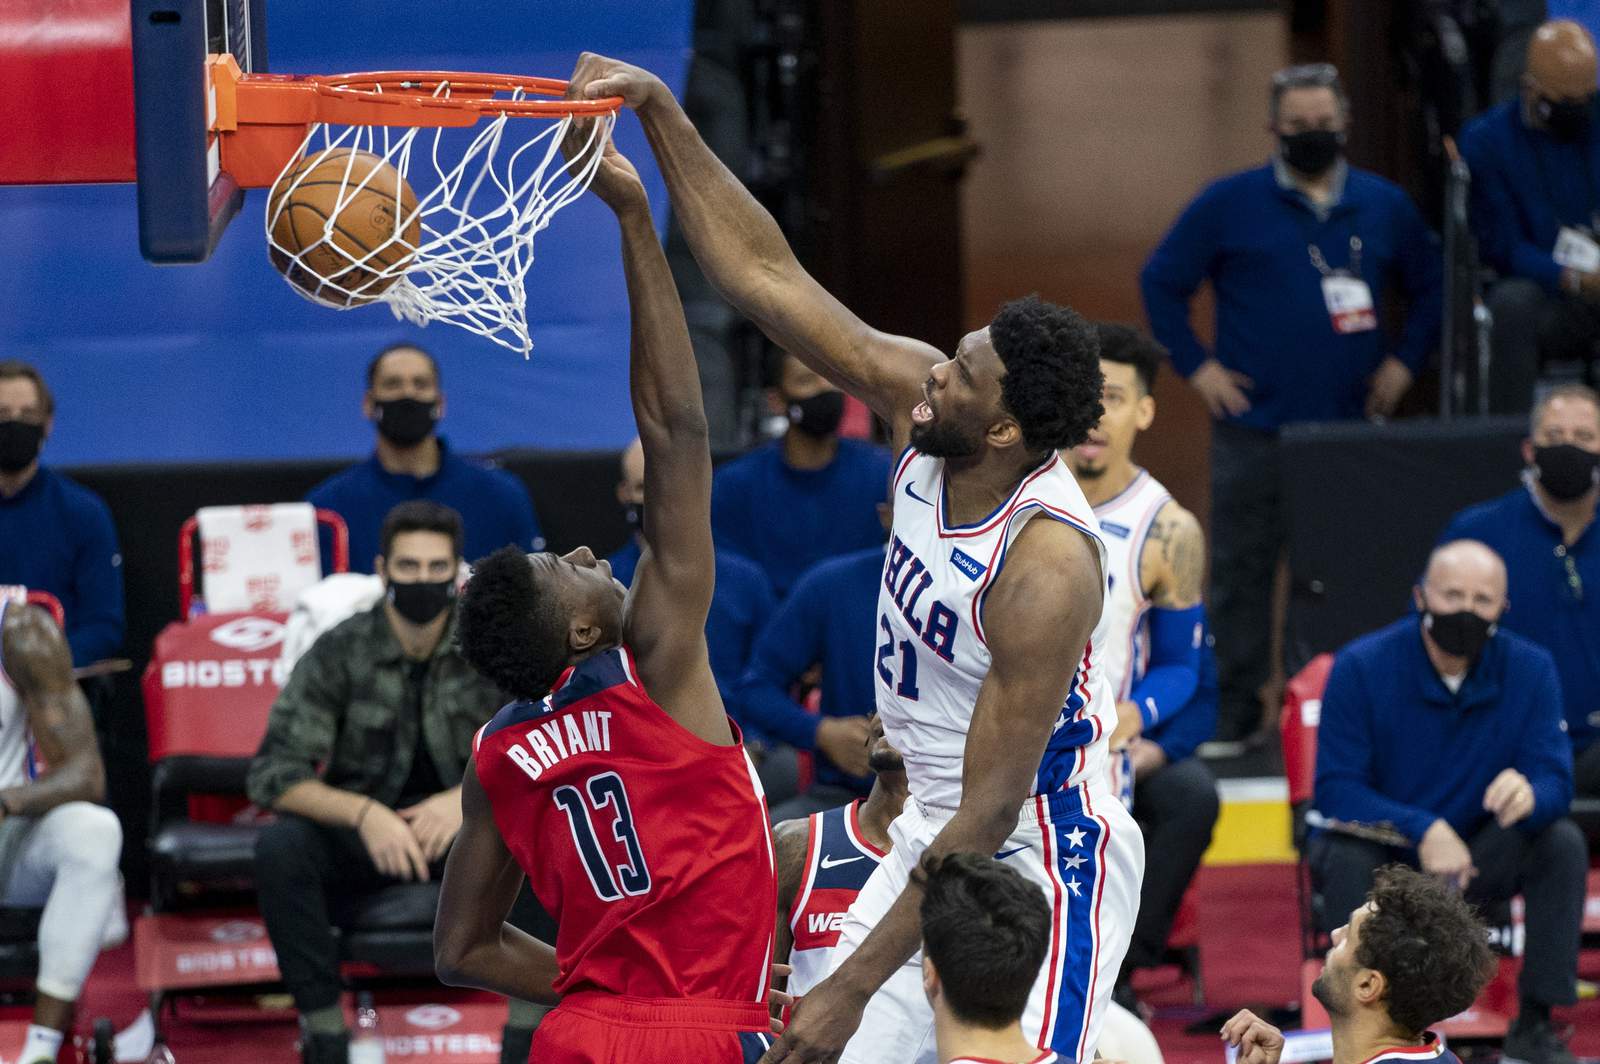 Sixers top Wizards despite Beal’s record-tying 60 points